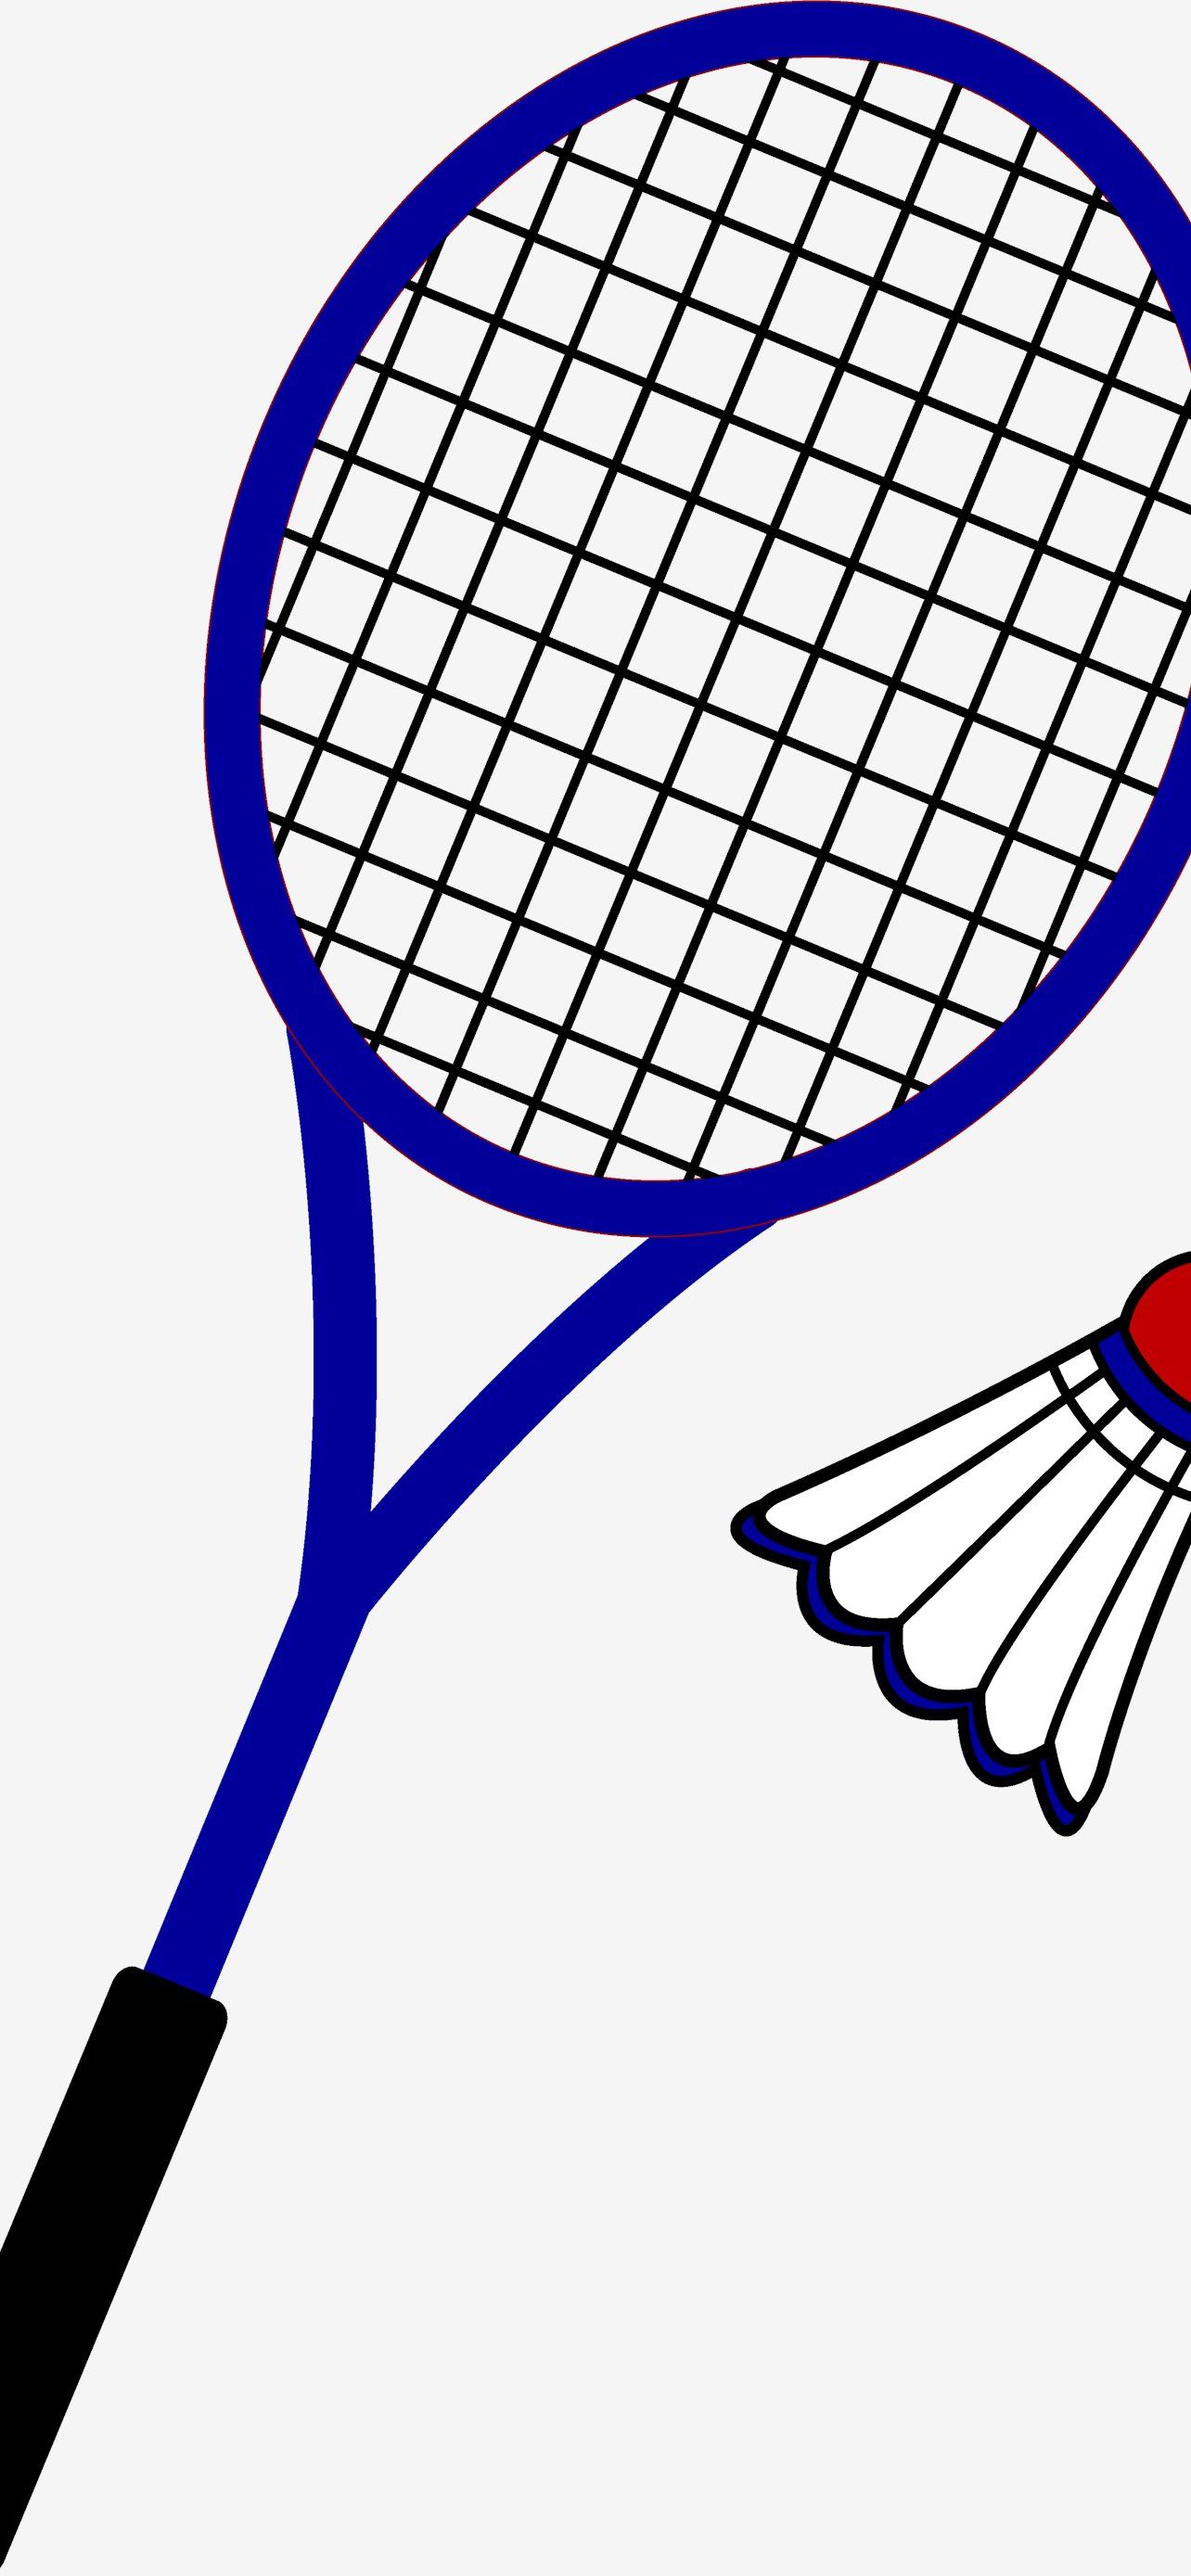 Free Badminton Free Badminton png images Free Clip... iPhone Wallpapers  Free Download